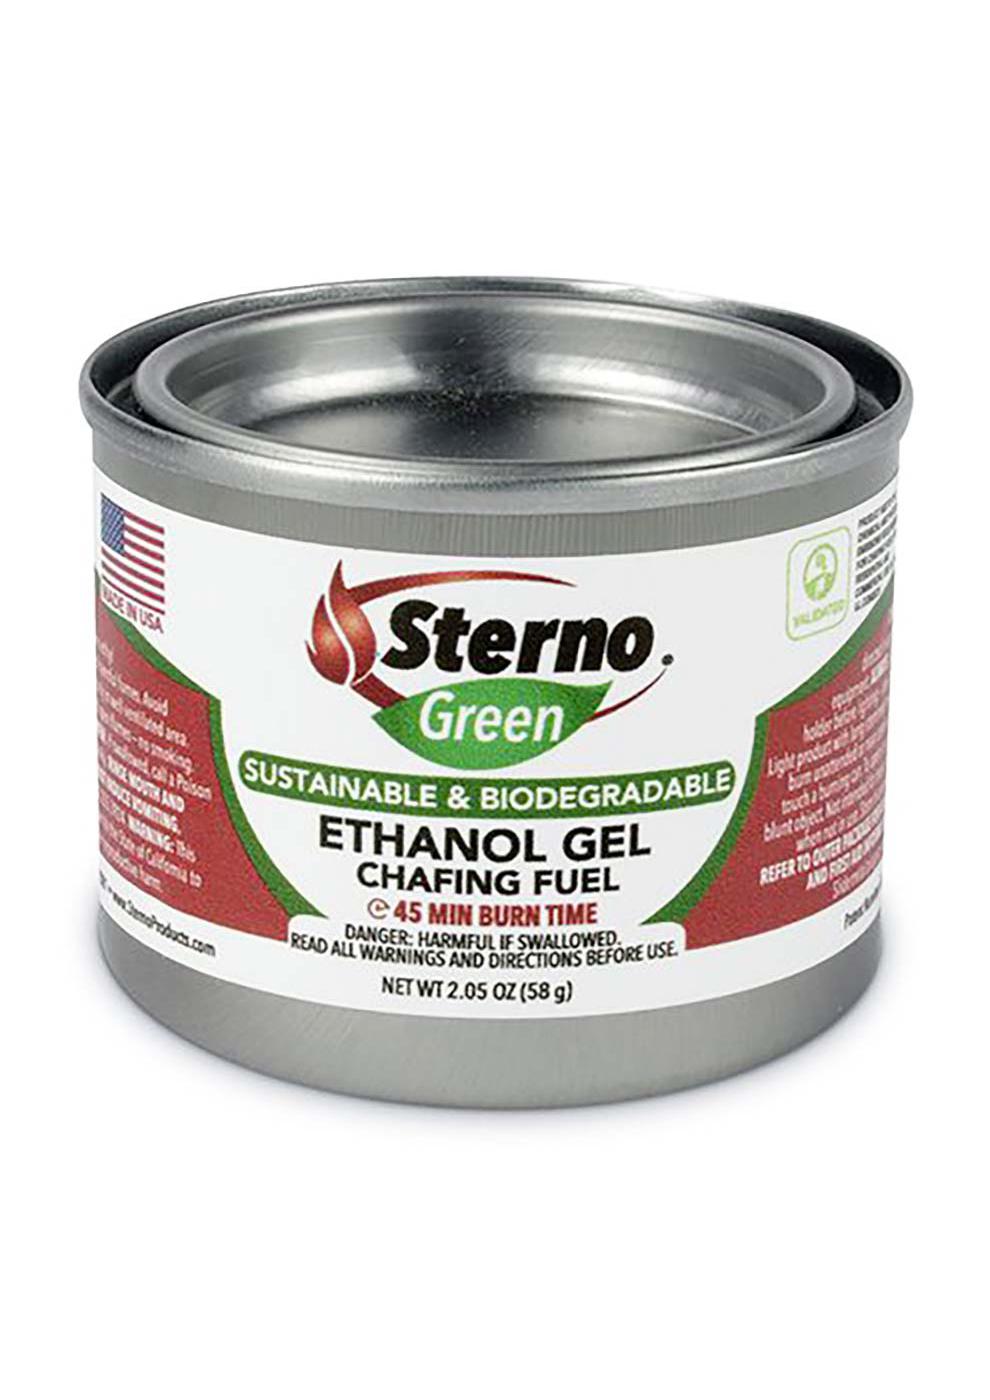 Sterno Green Canned Heat; image 2 of 2